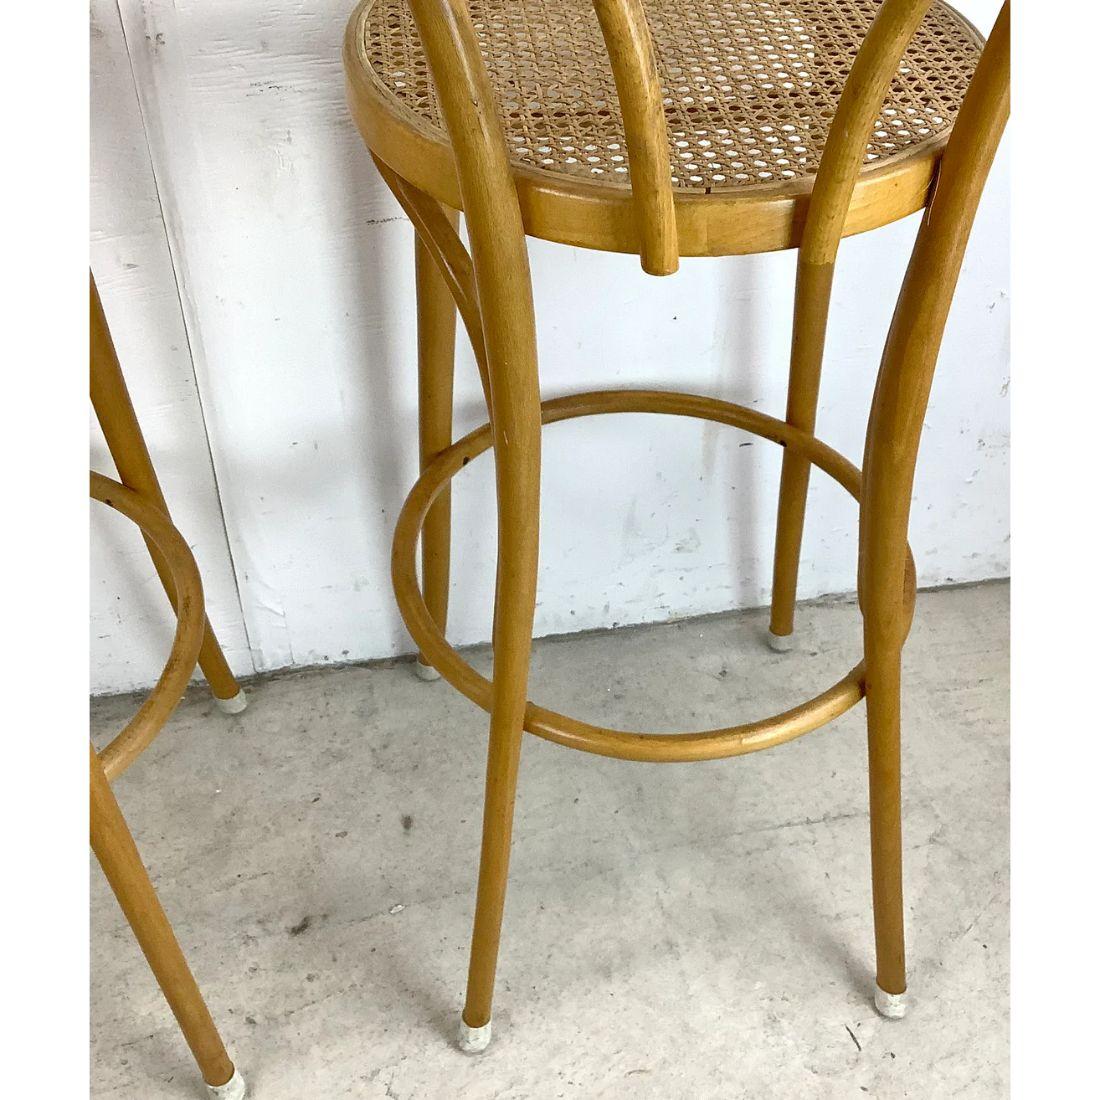 Pair of Vintage Modern Cane Seat Barstools In Good Condition For Sale In Trenton, NJ